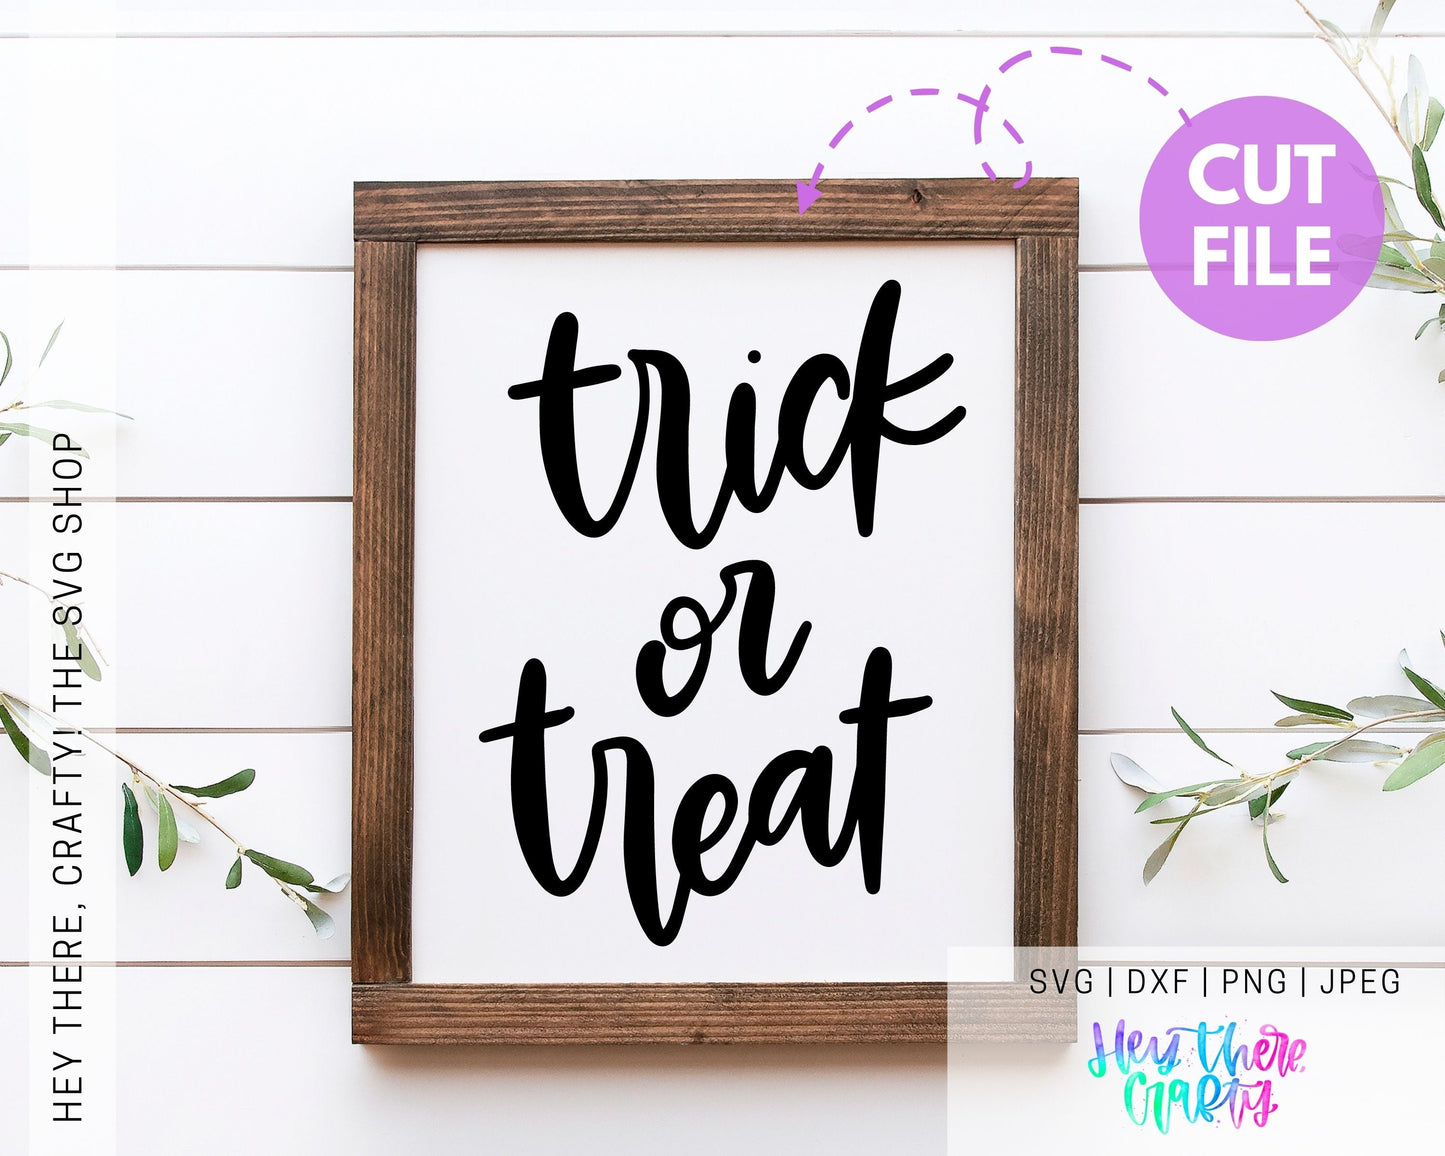 Trick or Treat | SVG, PNG, DXF, JPEG